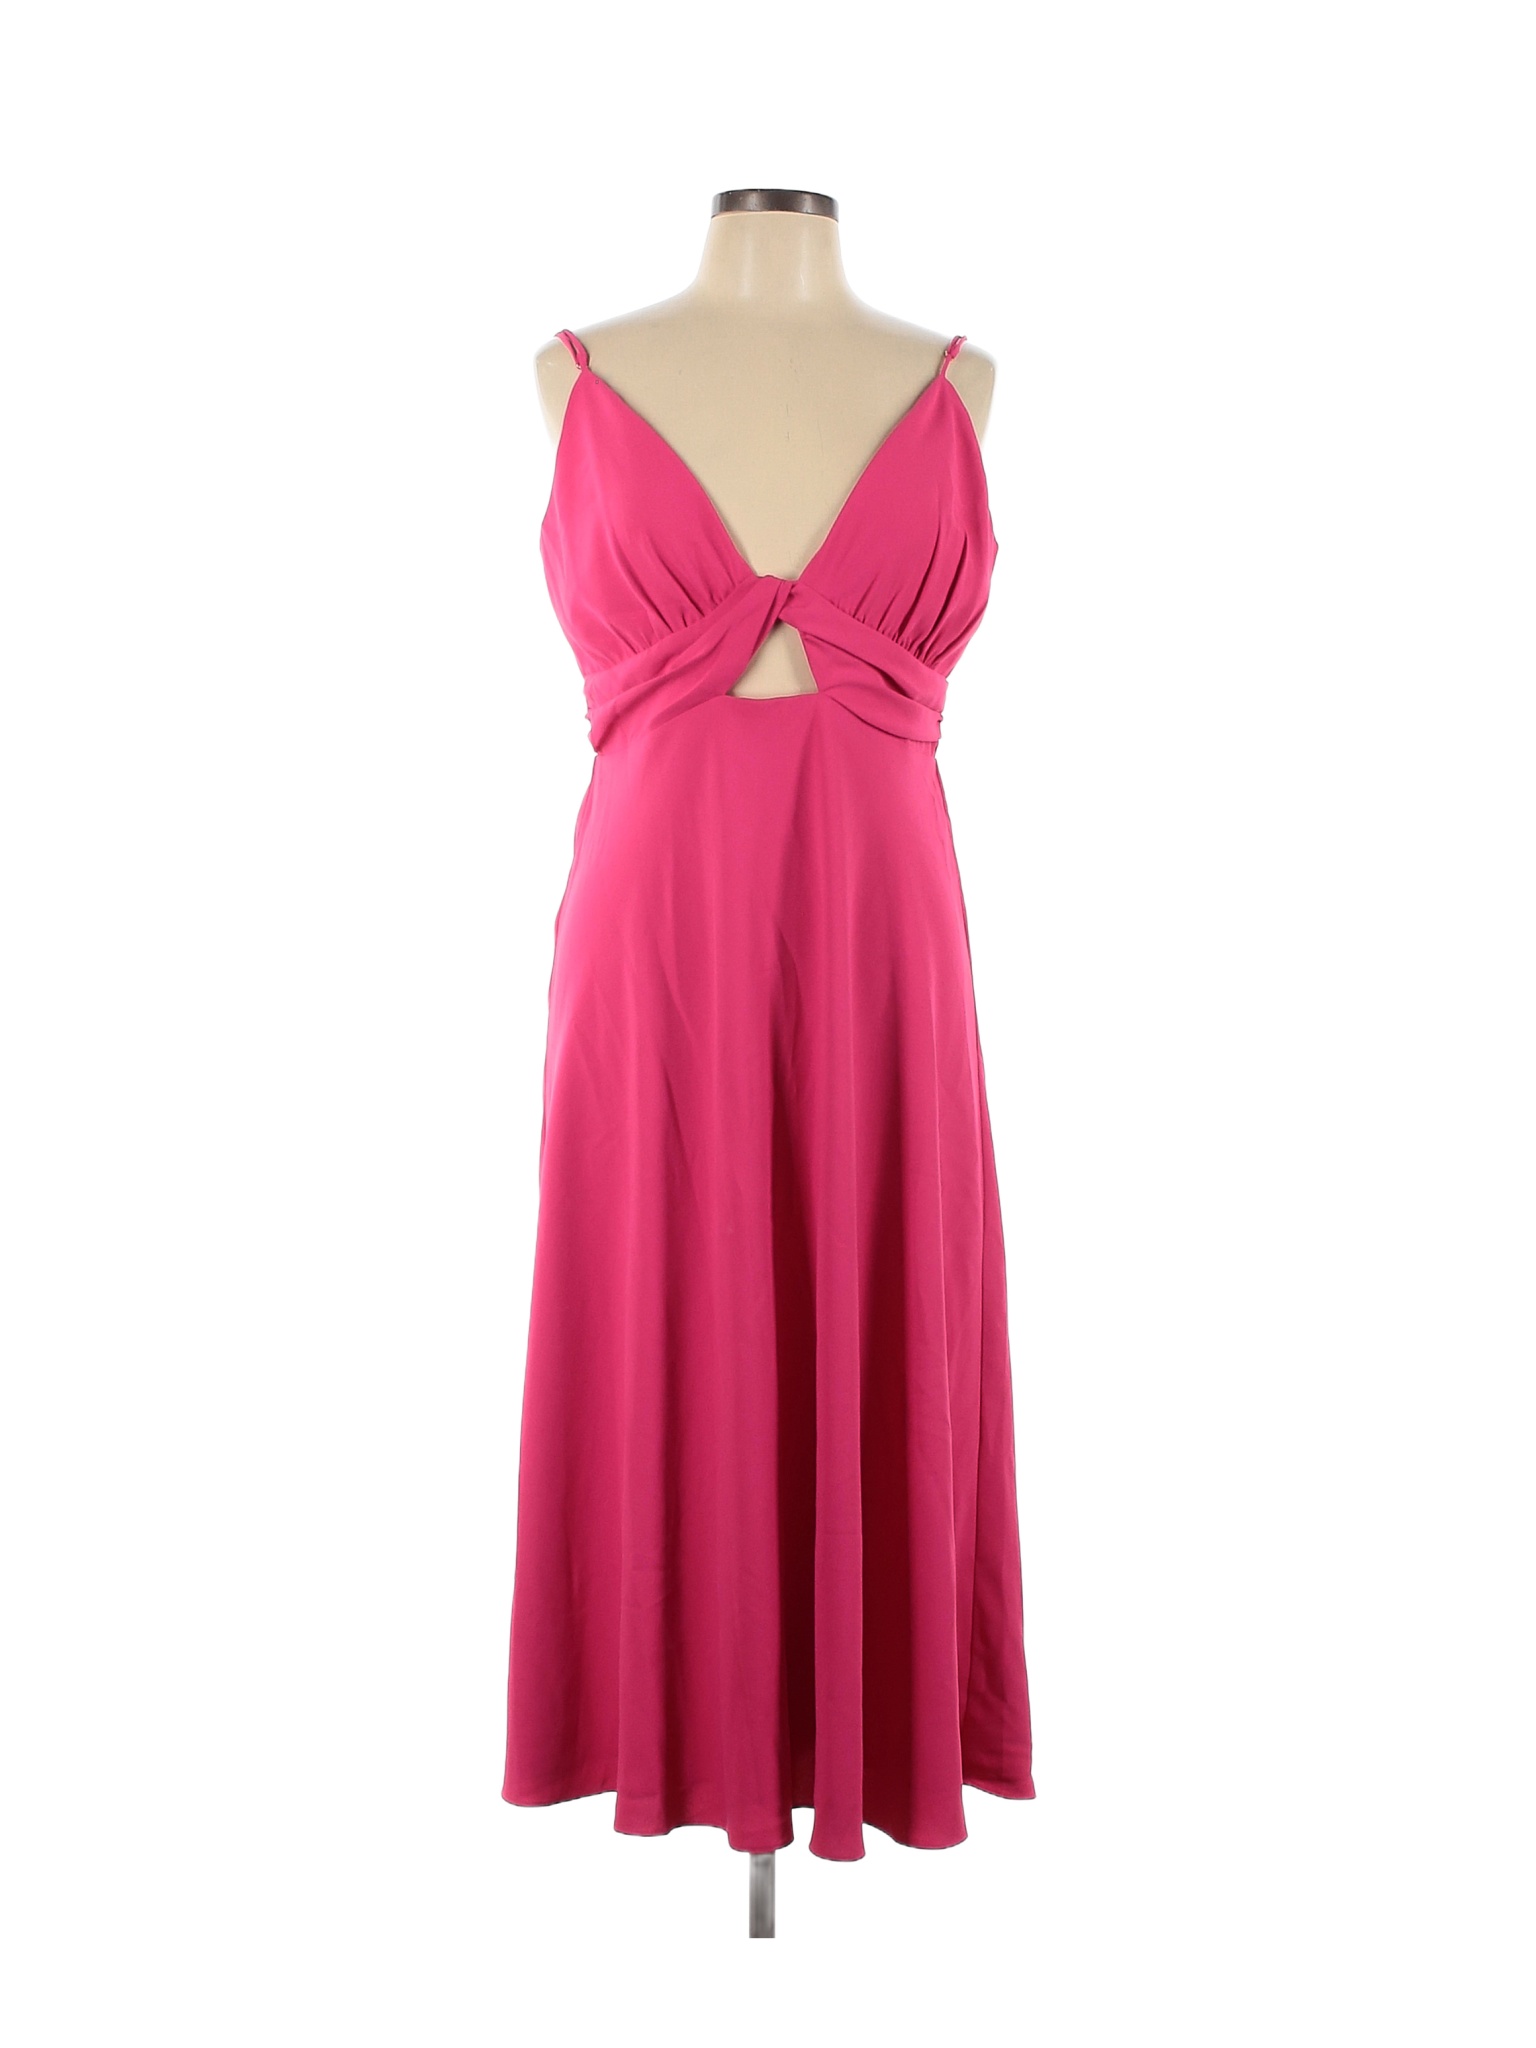 Alexia Admor 100% Polyester Solid Pink Cocktail Dress Size 10 - 85% off ...